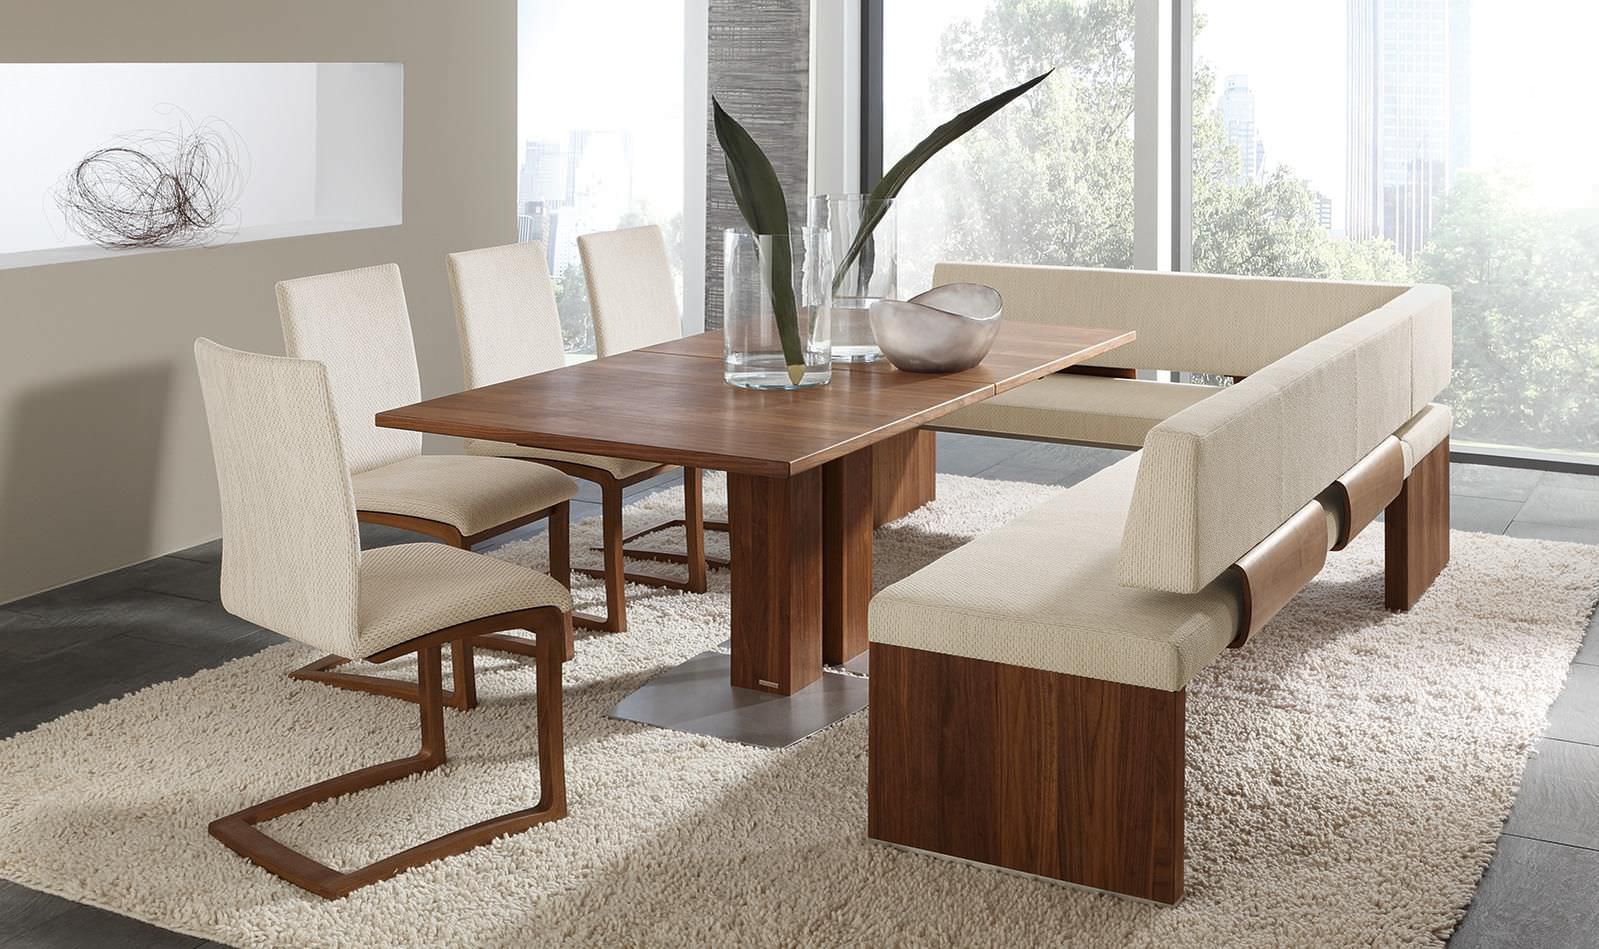 Dining Tables Ing Guide, Dining Room Tables Contemporary Wood